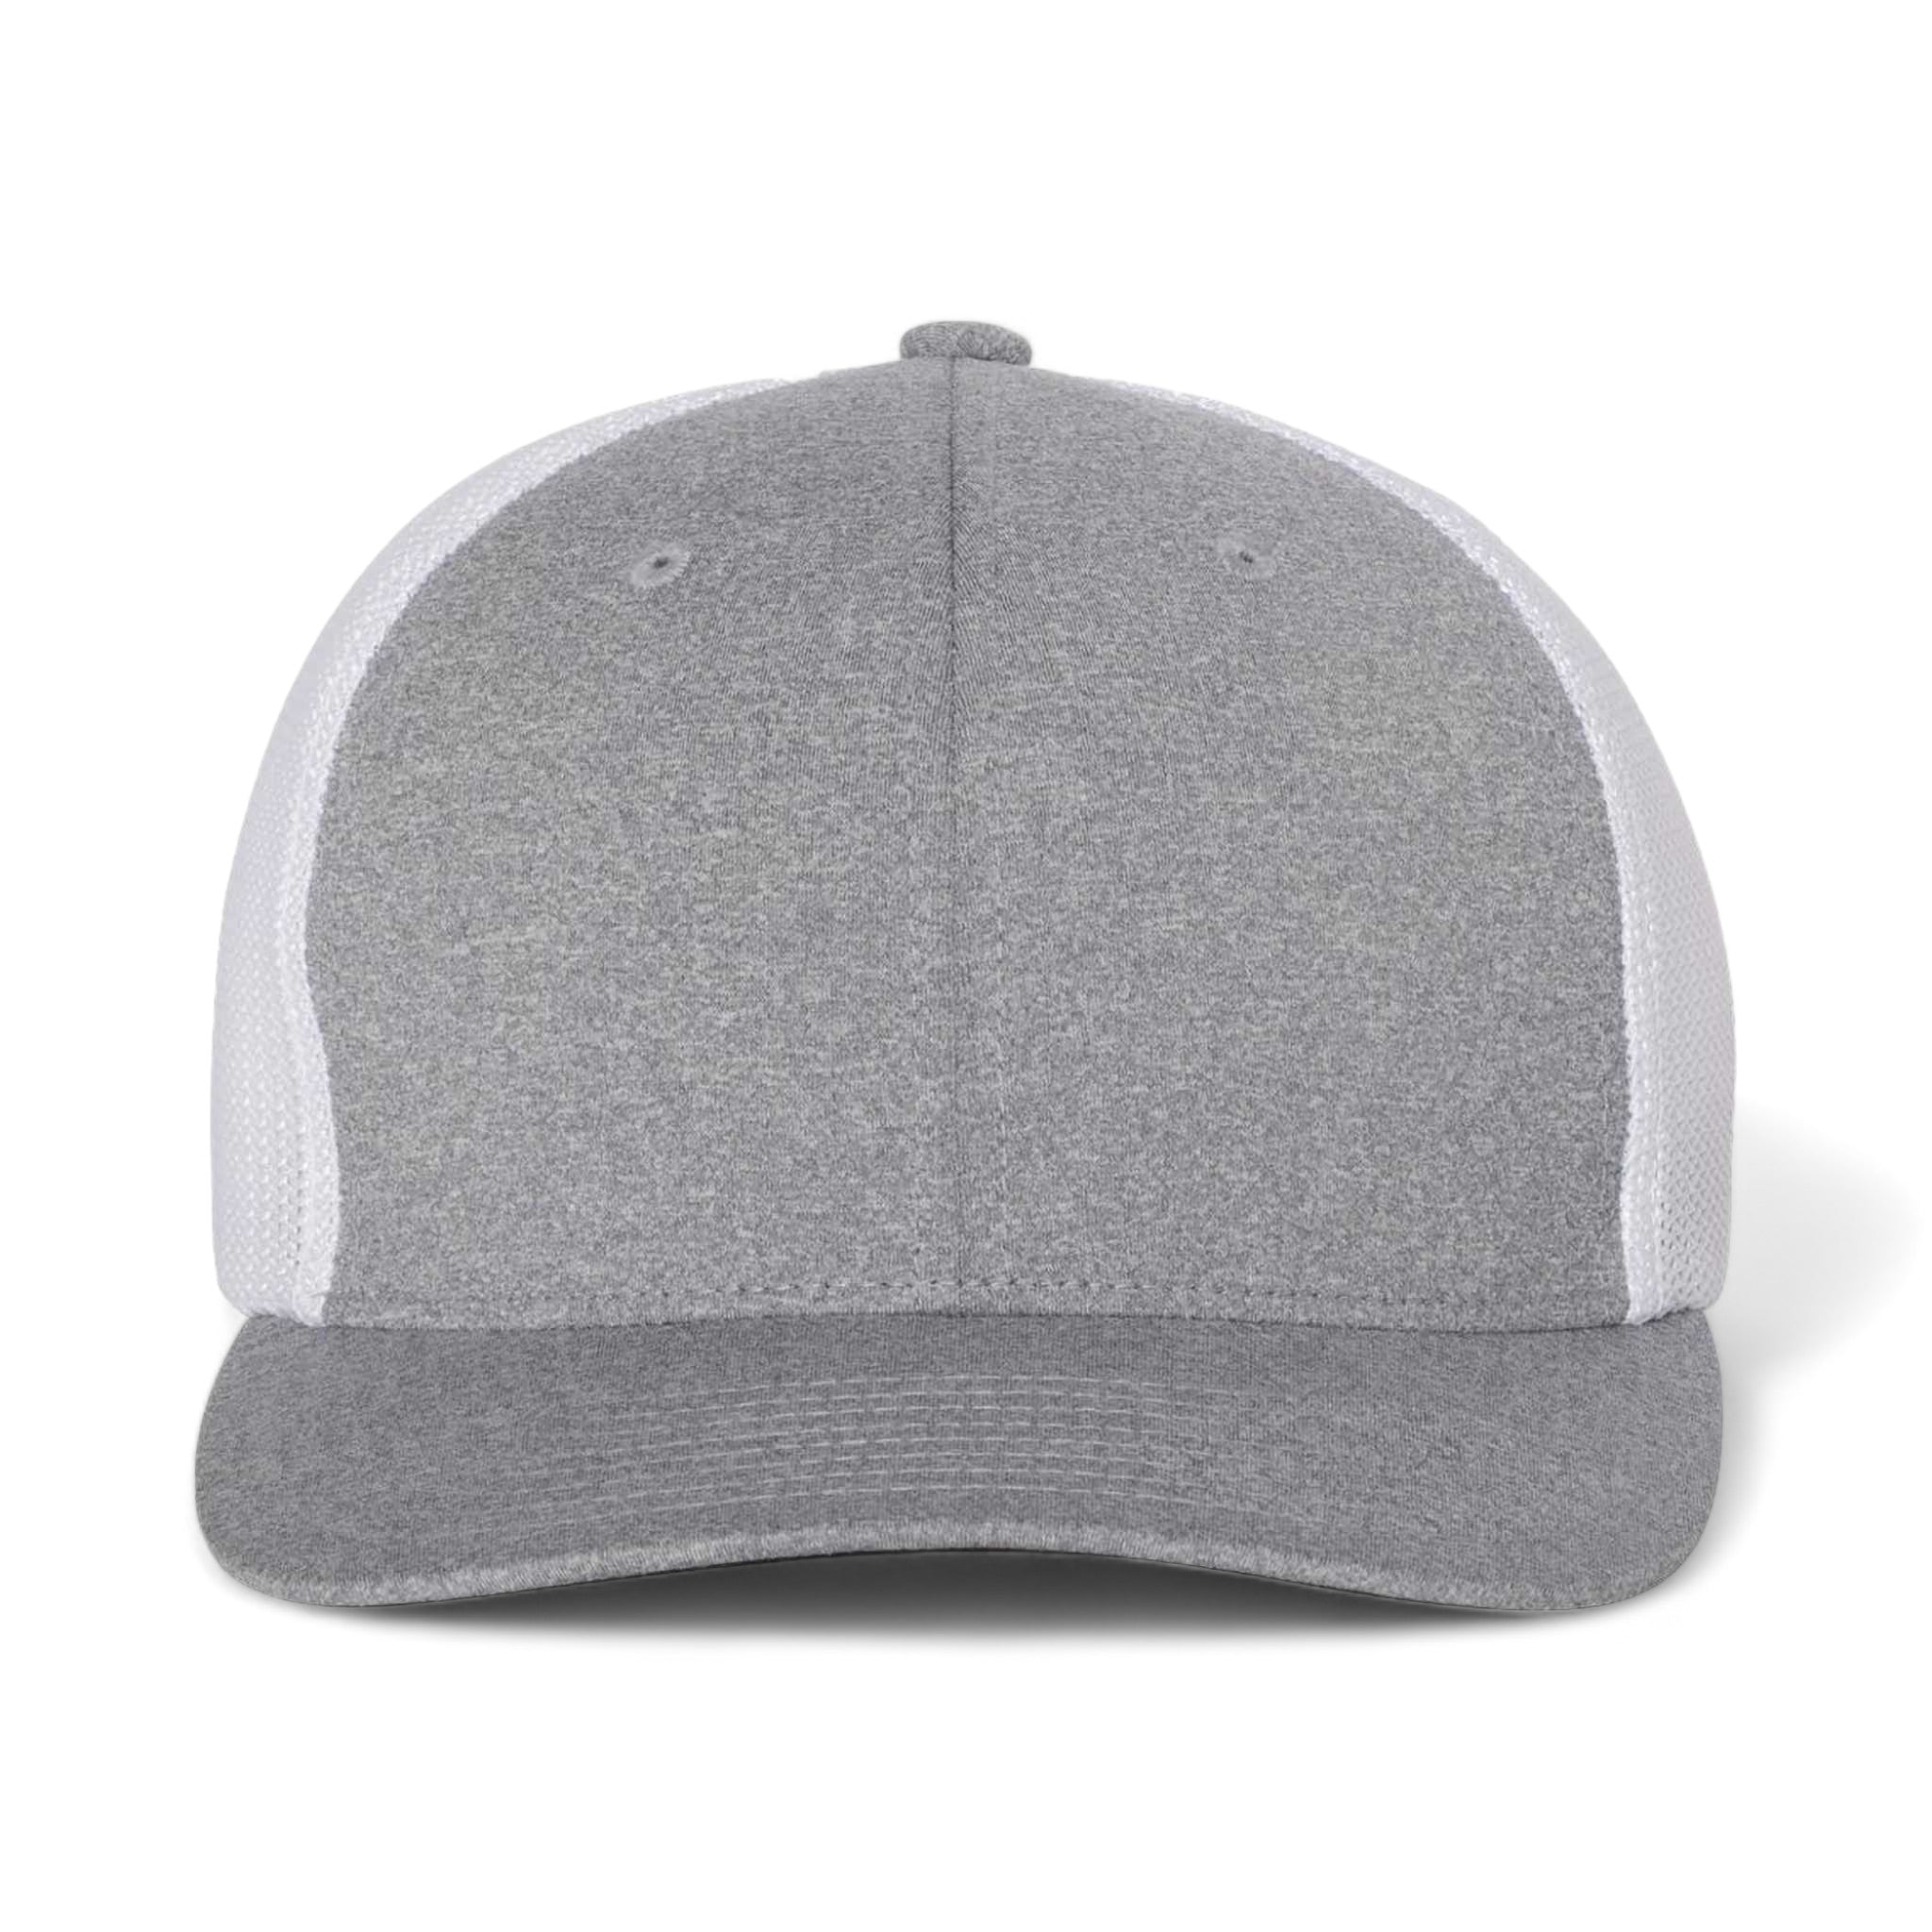 Front view of Flexfit 6311 custom hat in heather grey and white